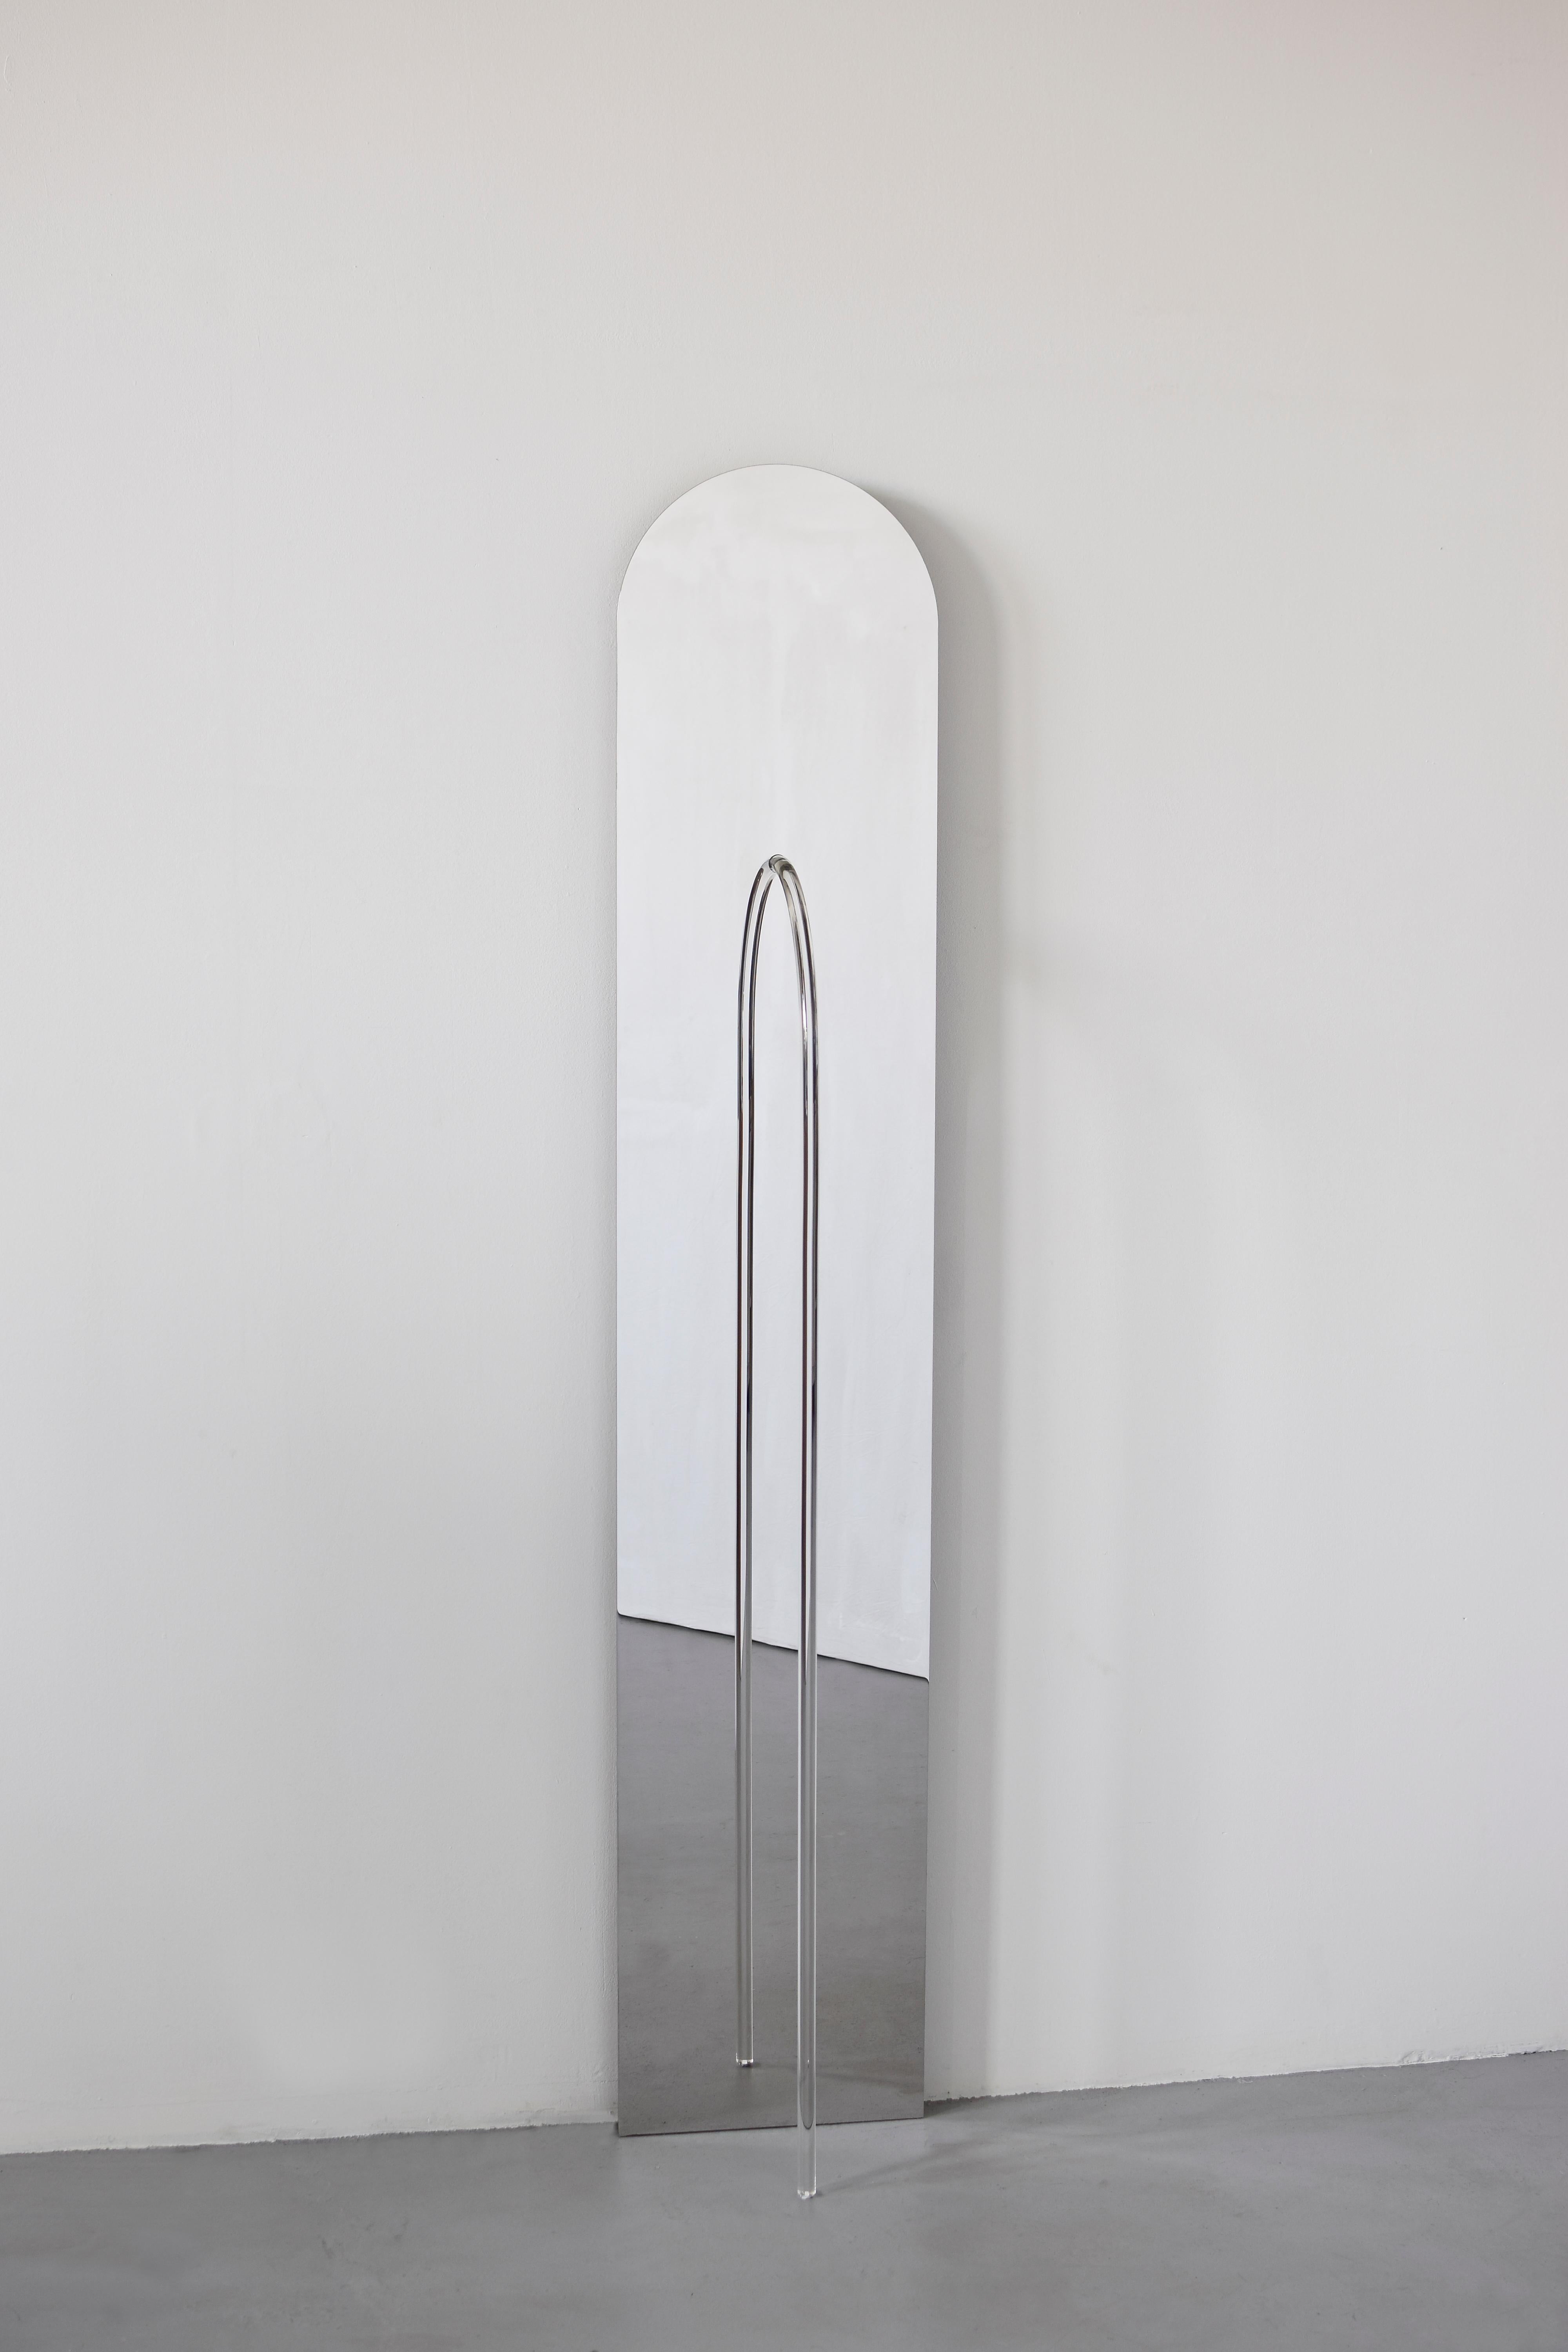 Original enlightened mirror - Maximilian Michaelis

Title: The elusive nature of perception, No. 05

Measures: ca. 36 x 190 x 26 cm.

Material: polished stainless steel, Belgian bluestone, acrylic glass, Led

The basis and inspiration for